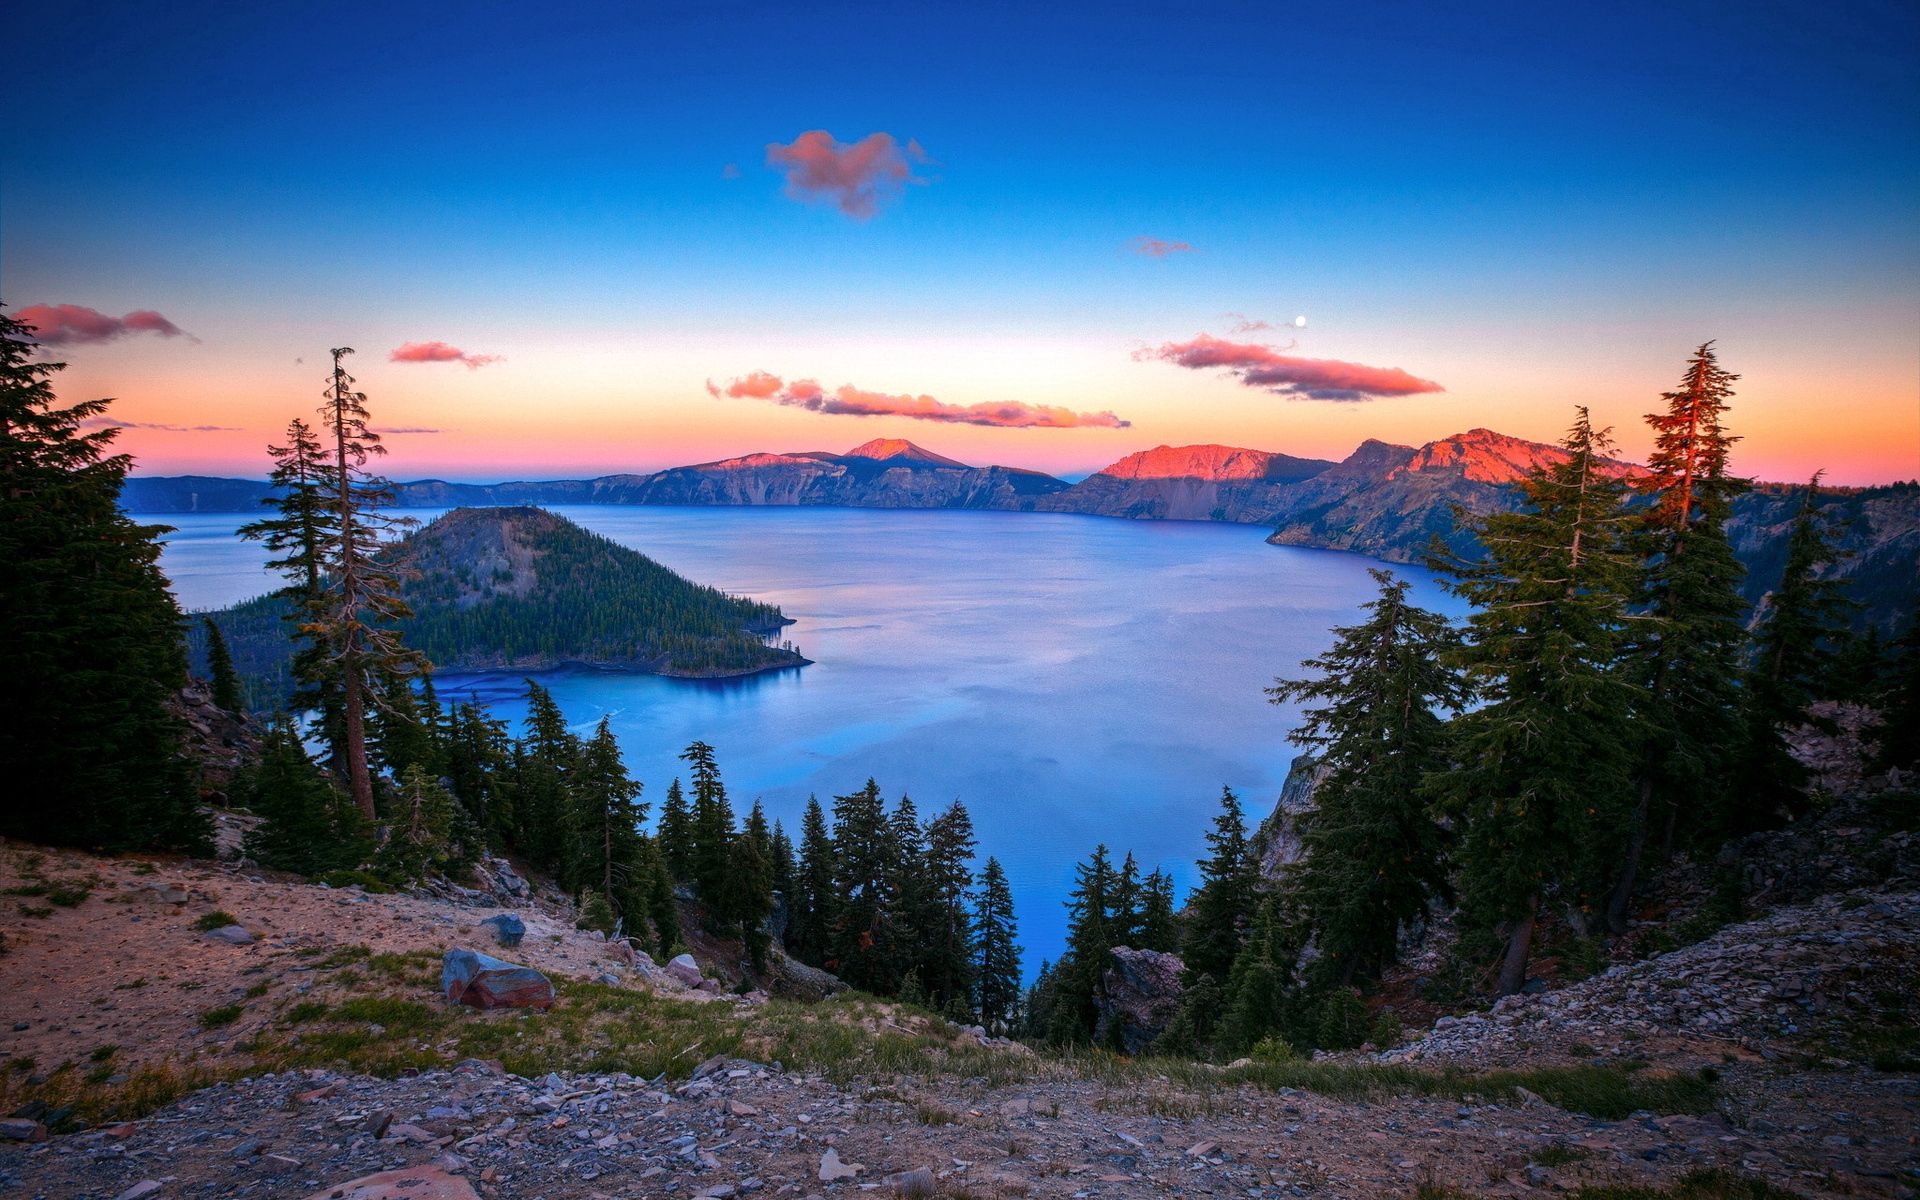 mountains, nature, trees, sunset, sky, clouds, lake, height, island, islet, rocky, stony